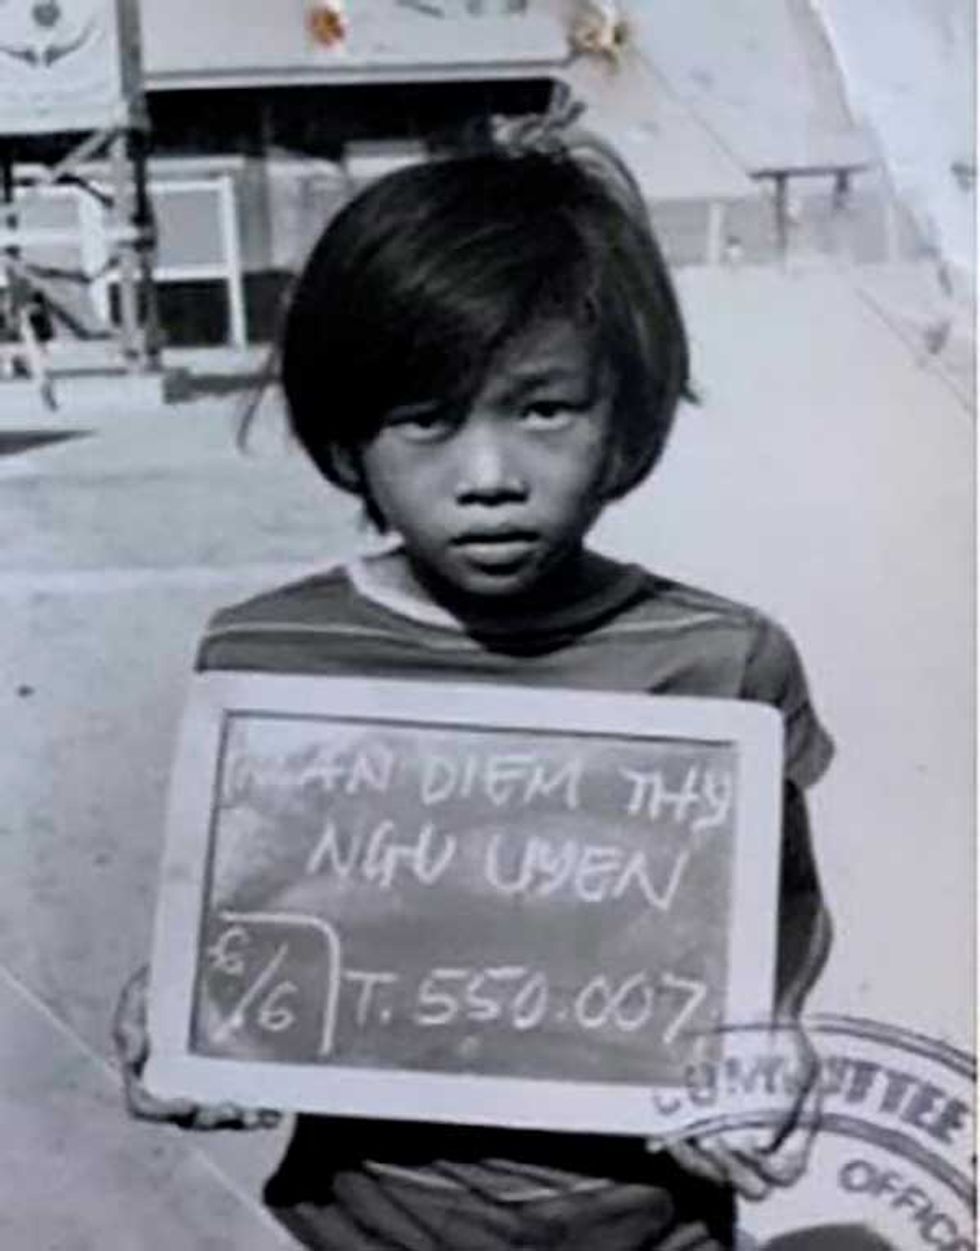 Thy Tran holding a board with her name and refugee number in Lumpini, Thailand in 1979.